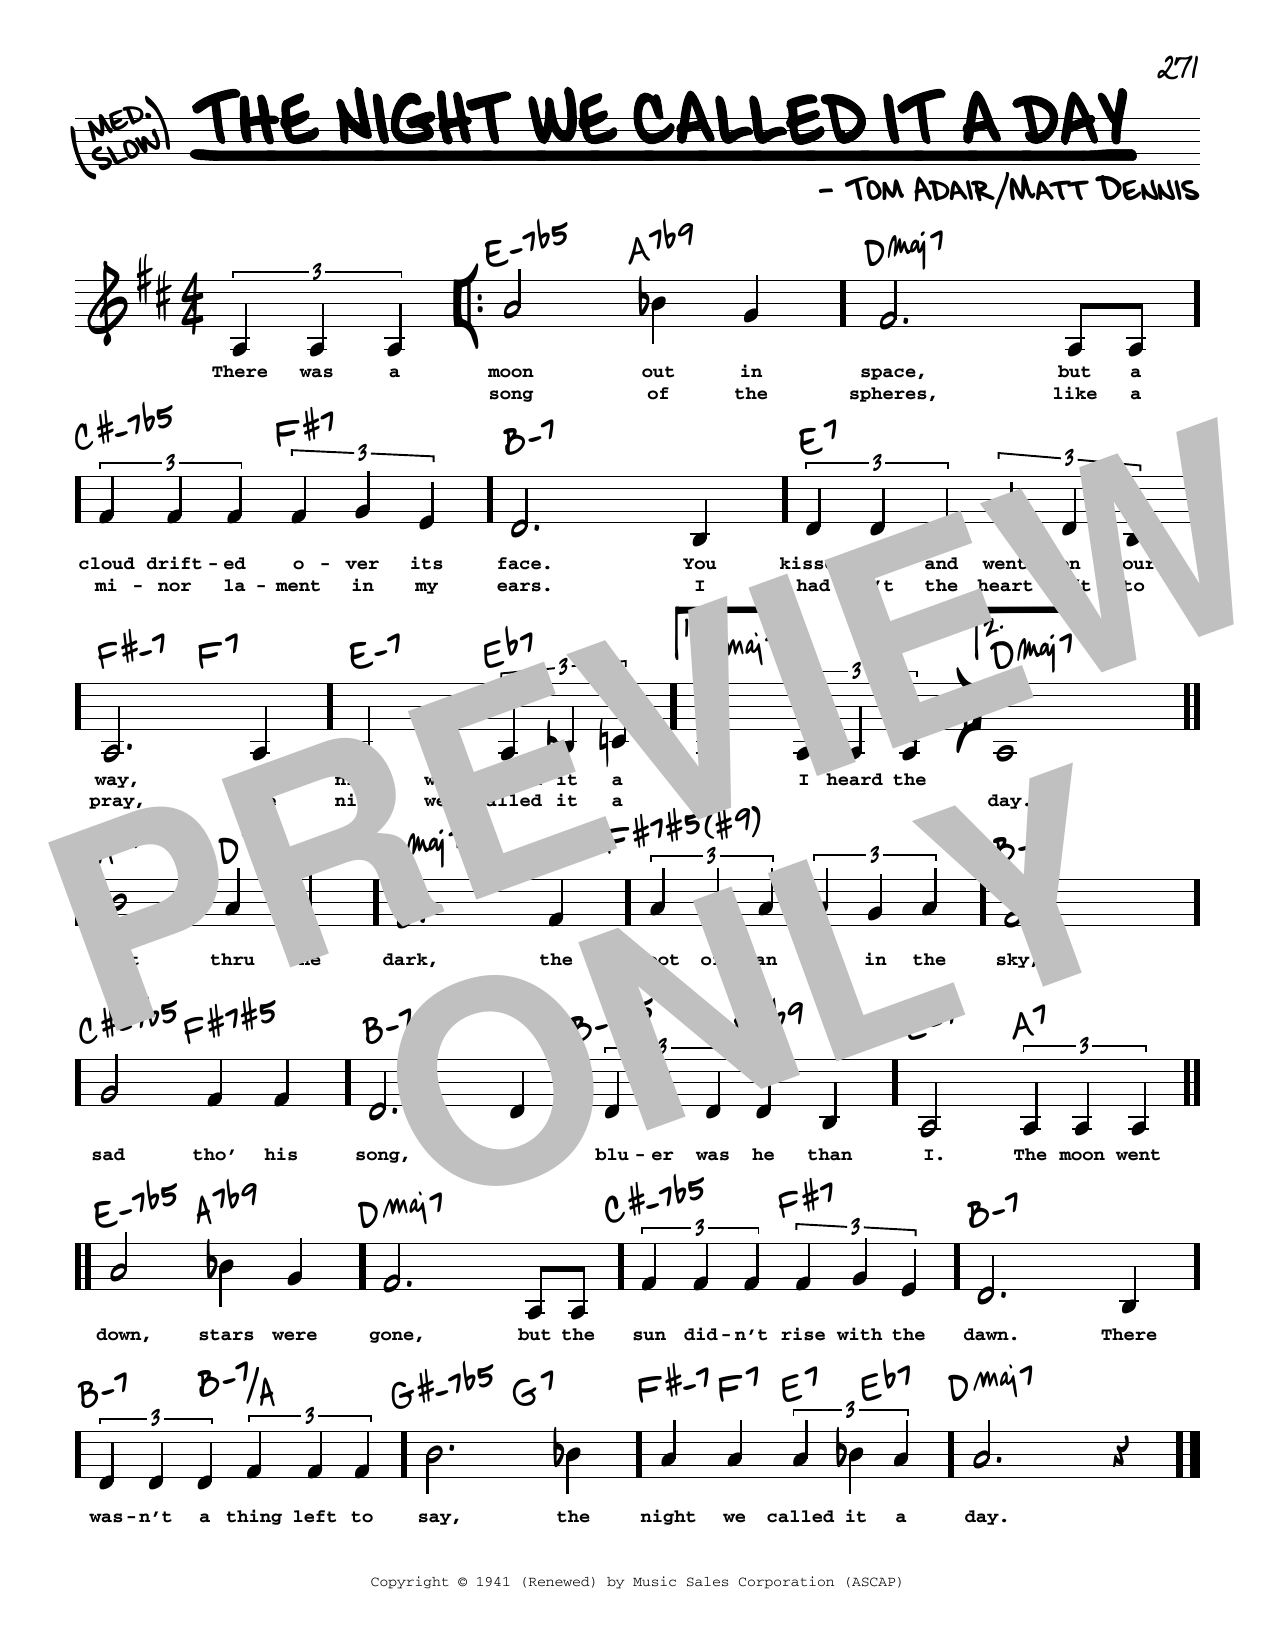 Frank Sinatra The Night We Called It A Day (Low Voice) sheet music notes printable PDF score